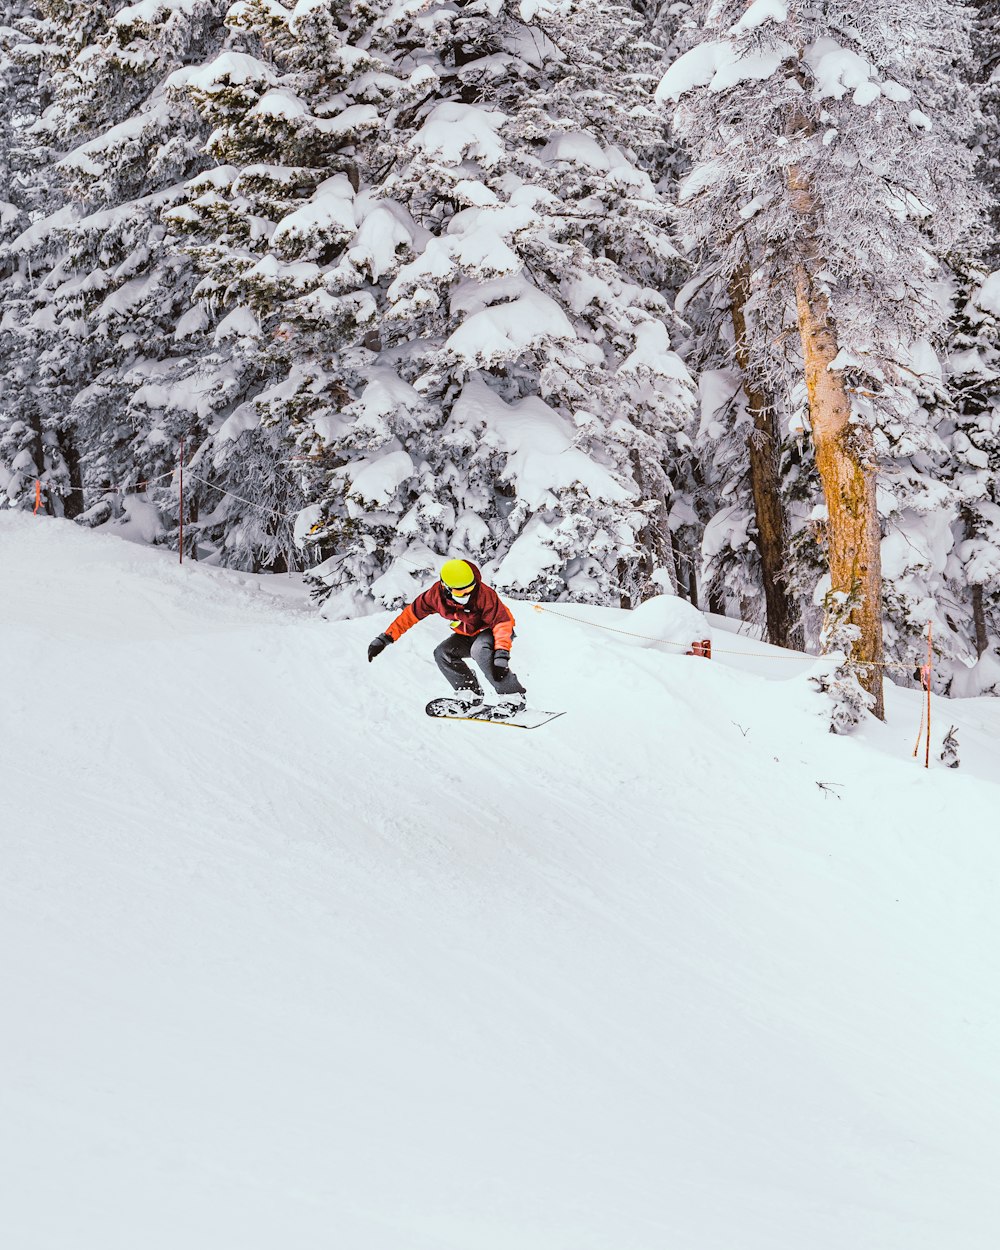 person in red jacket riding on snowboard on snow covered ground during daytime